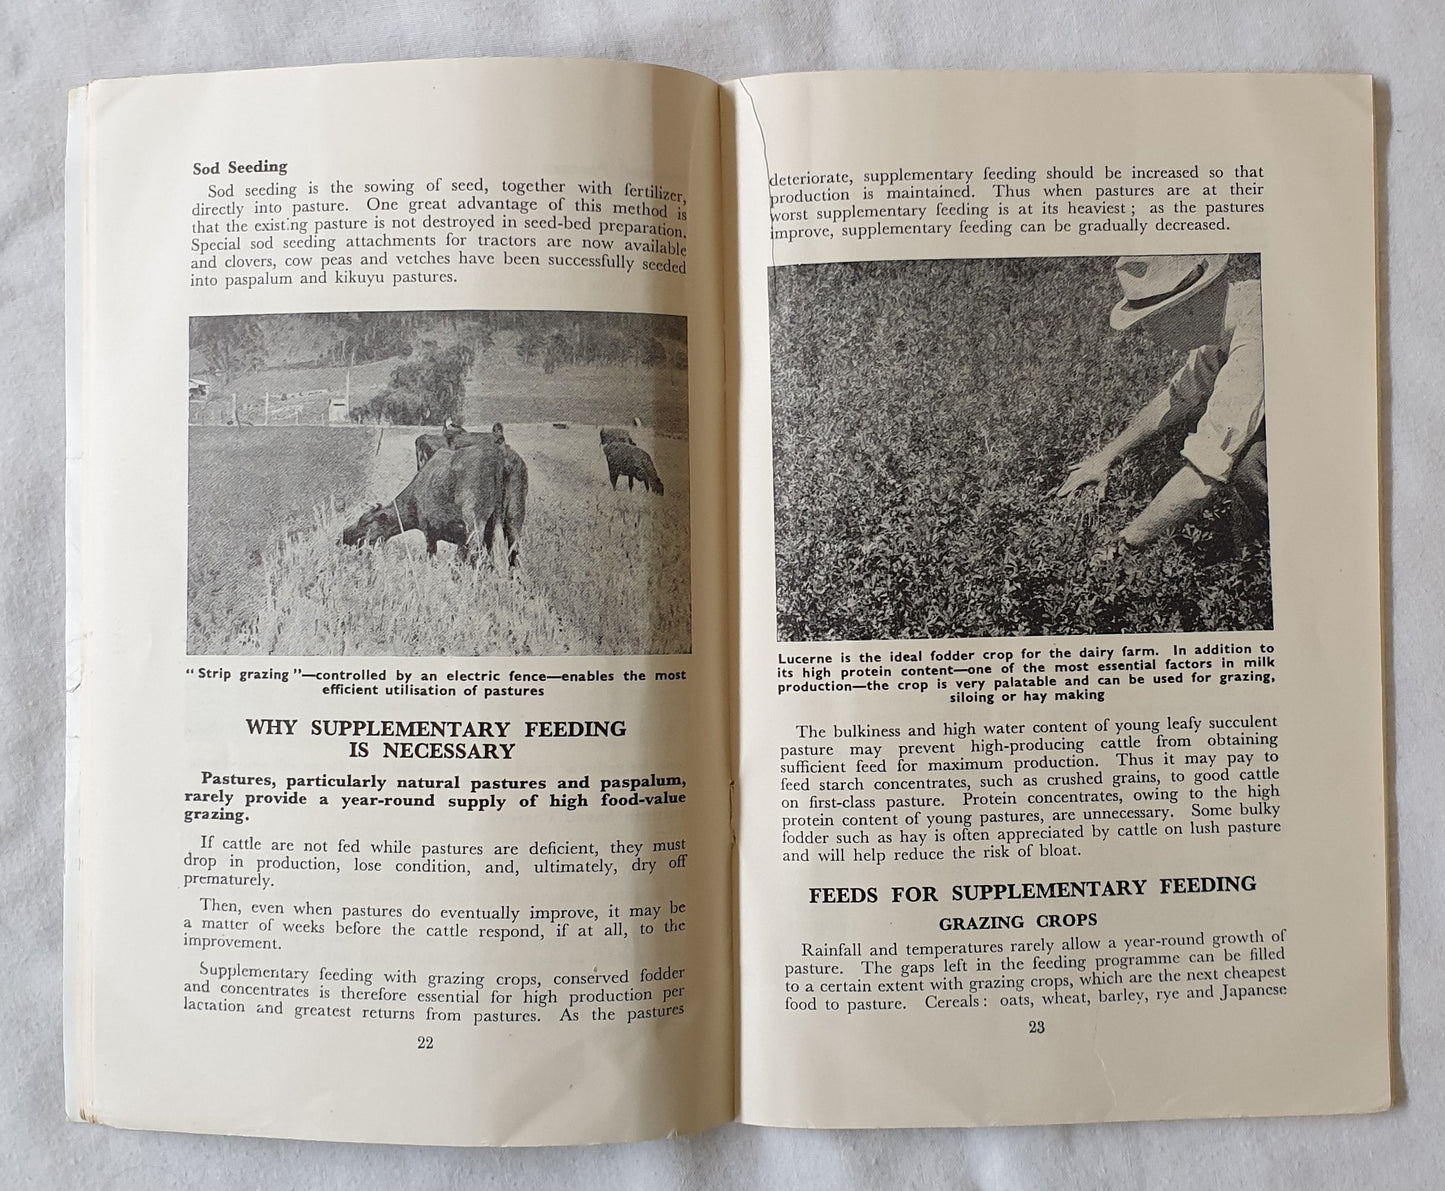 Feeding for Milk Production by G. L. McClymont and P. J. Mylrea